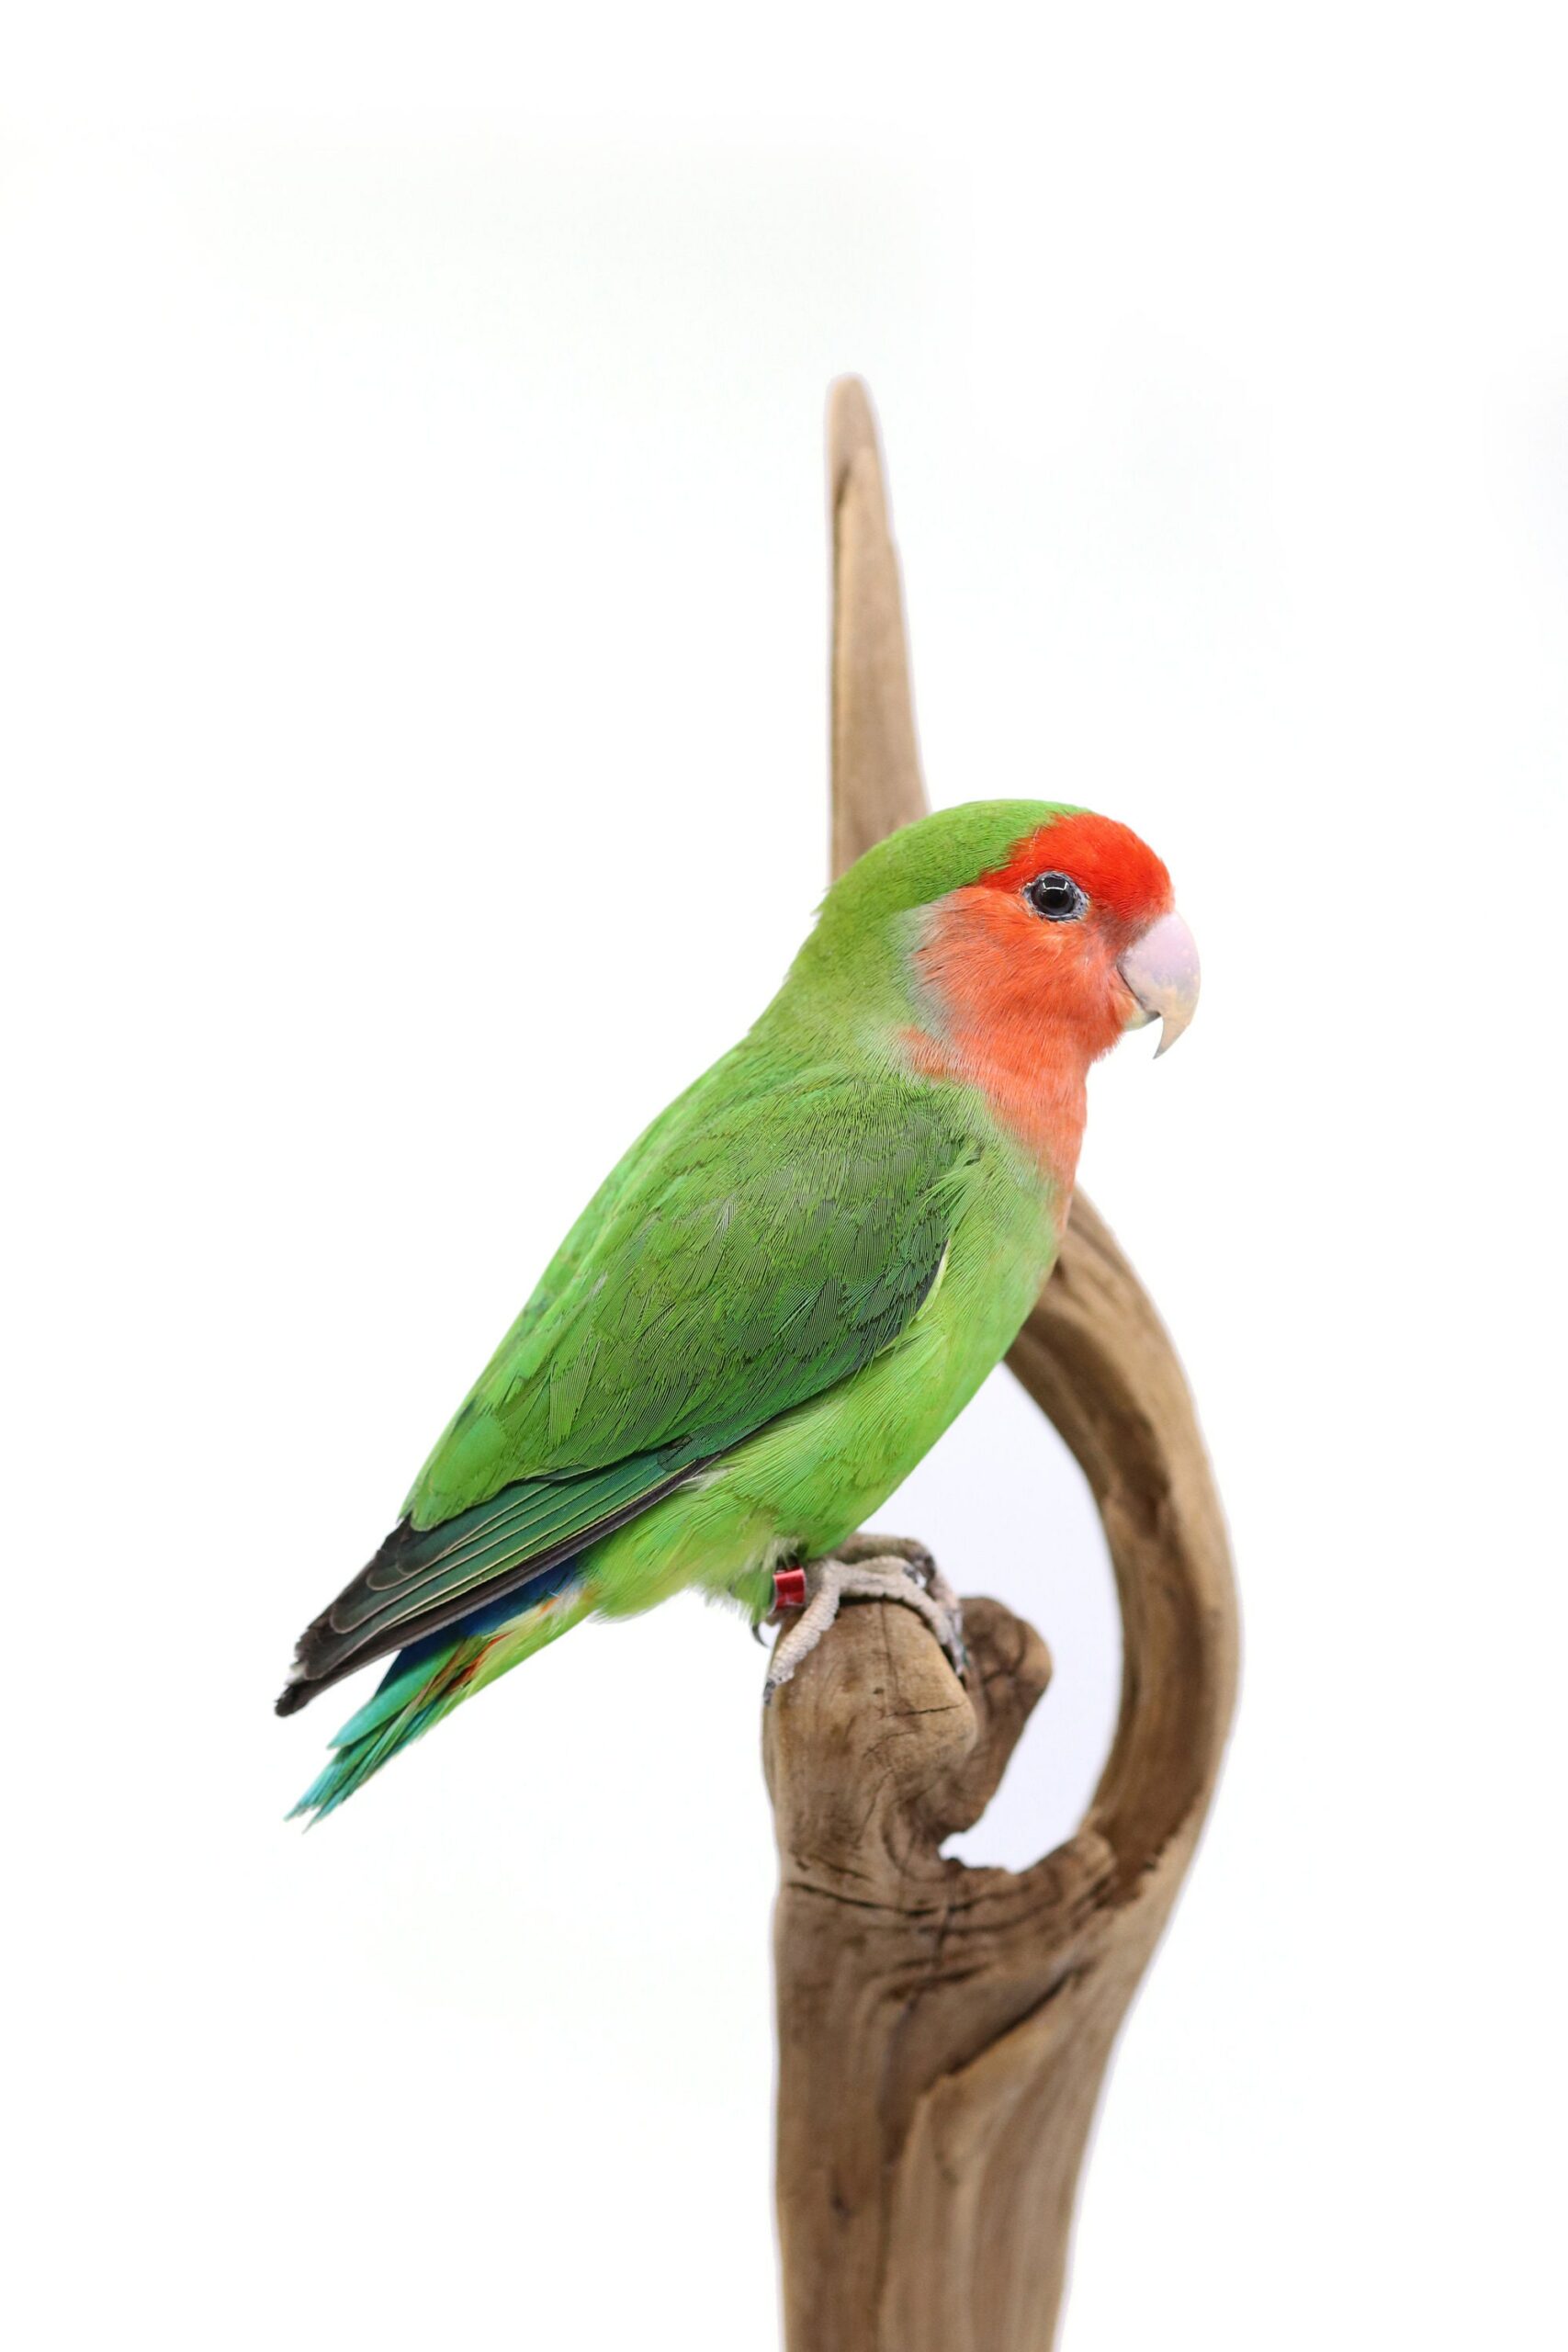 New professional taxidermy Rosy-faced lovebird  / mounted stuffed bird / taxidermied / opgezette vogel love bird agapornis